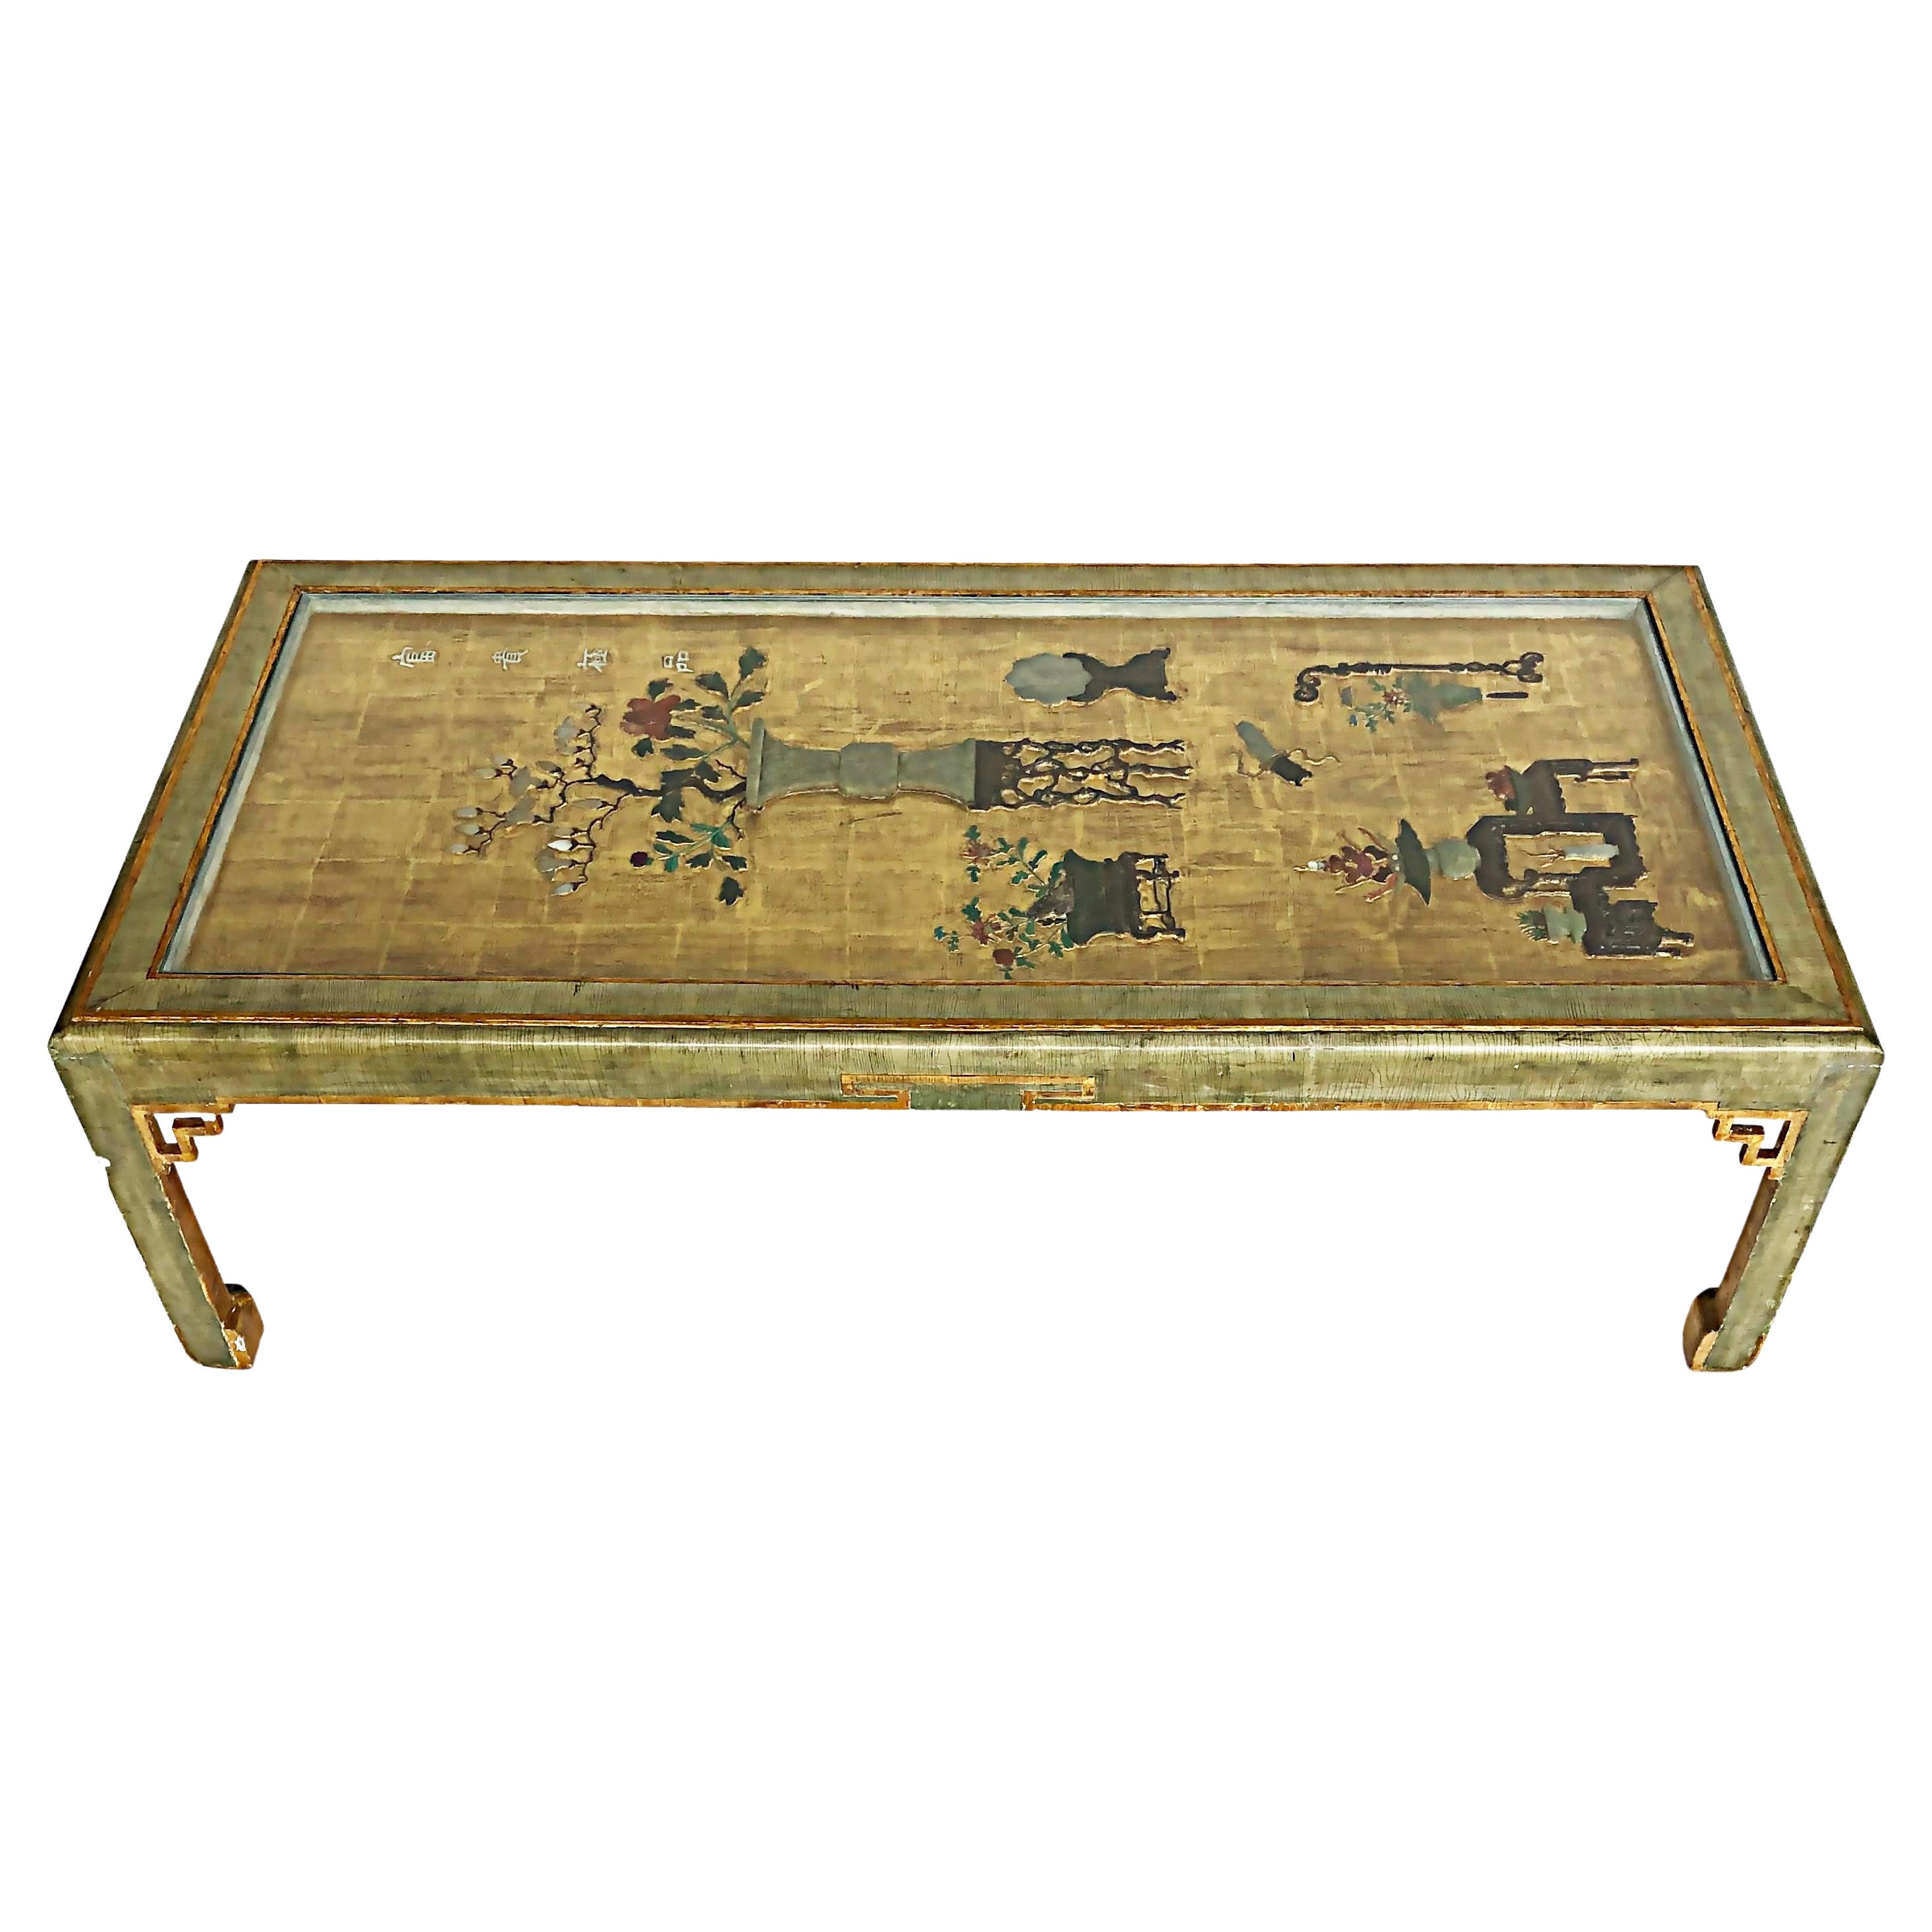 Chinoiserie Gold Leaf Hardstone Decorated Coffee Table from a Screen Panel